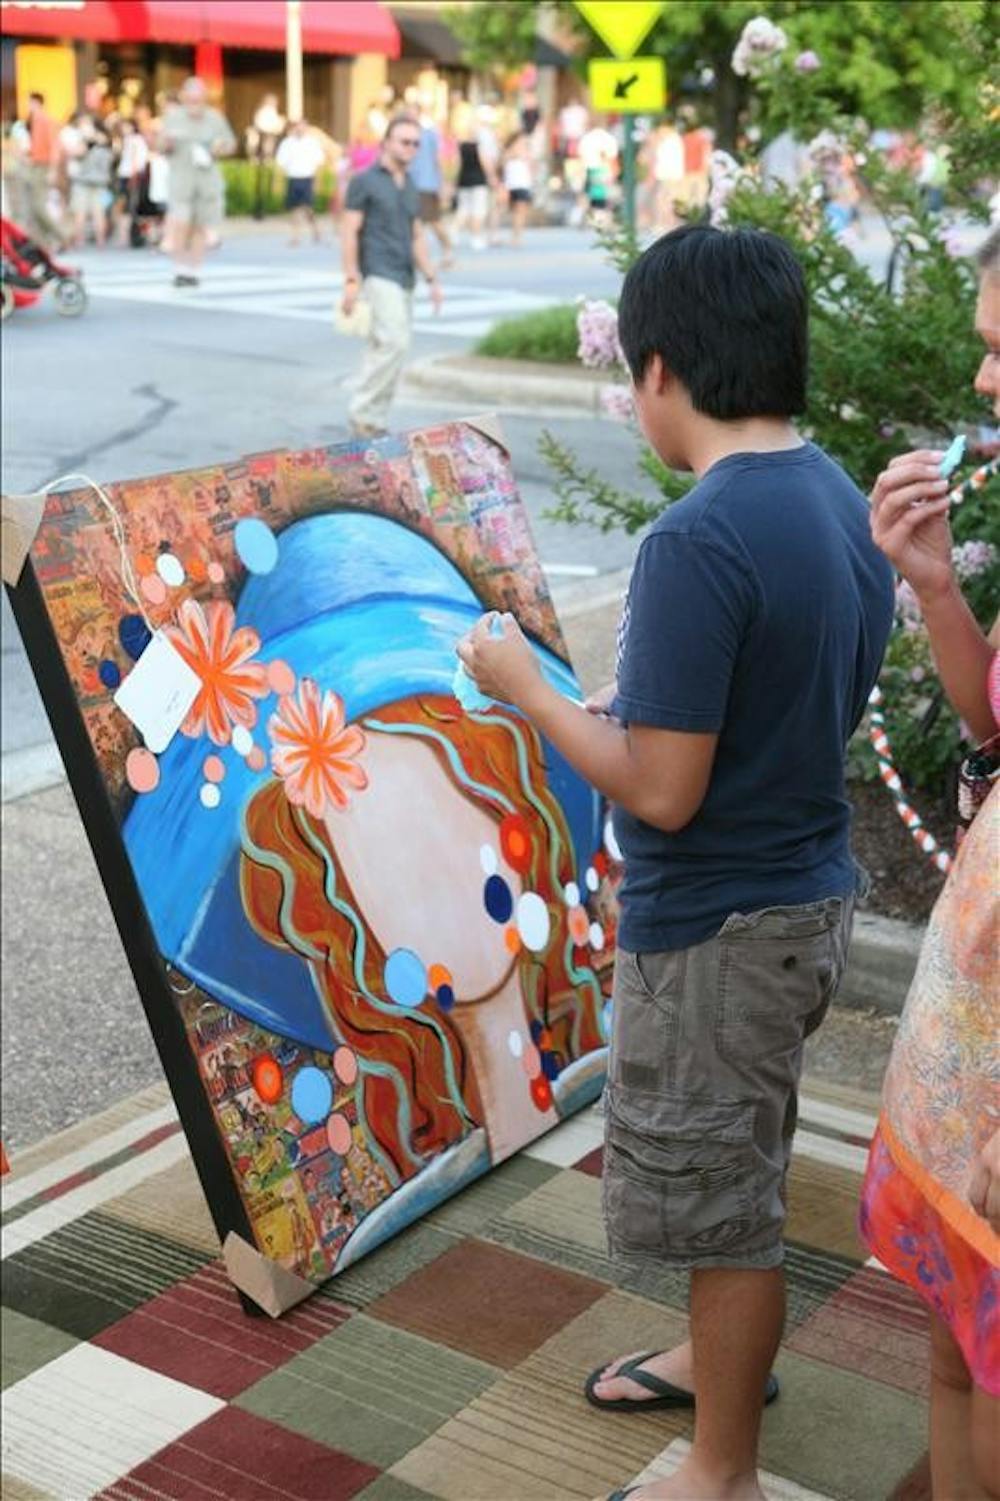 Onlookers participating in the 7th annual SummerNight's Art Walk